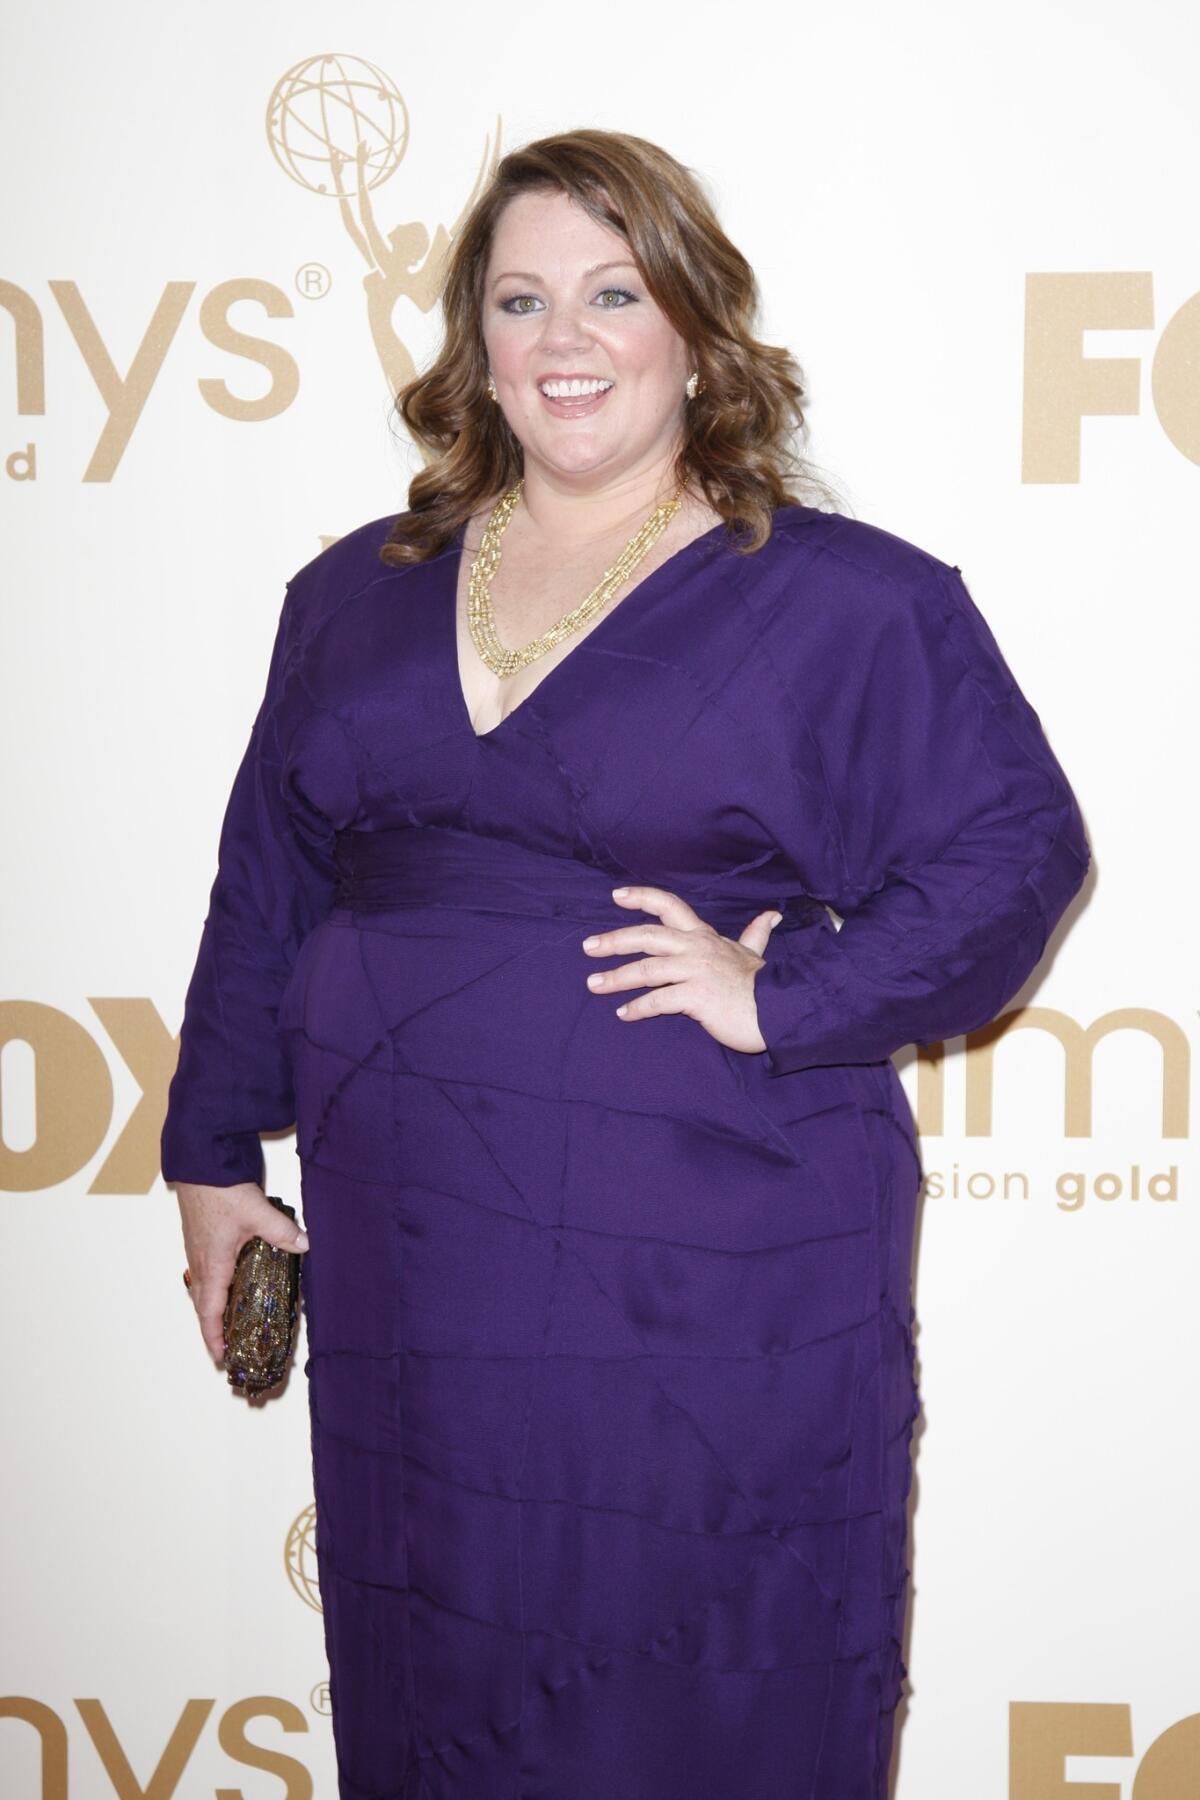 "Bridesmaids" and "The Heat" star Melissa McCarthy will design her own clothing line. She designed this dress for the 2011 Emmy Awards with Daniella Pear.